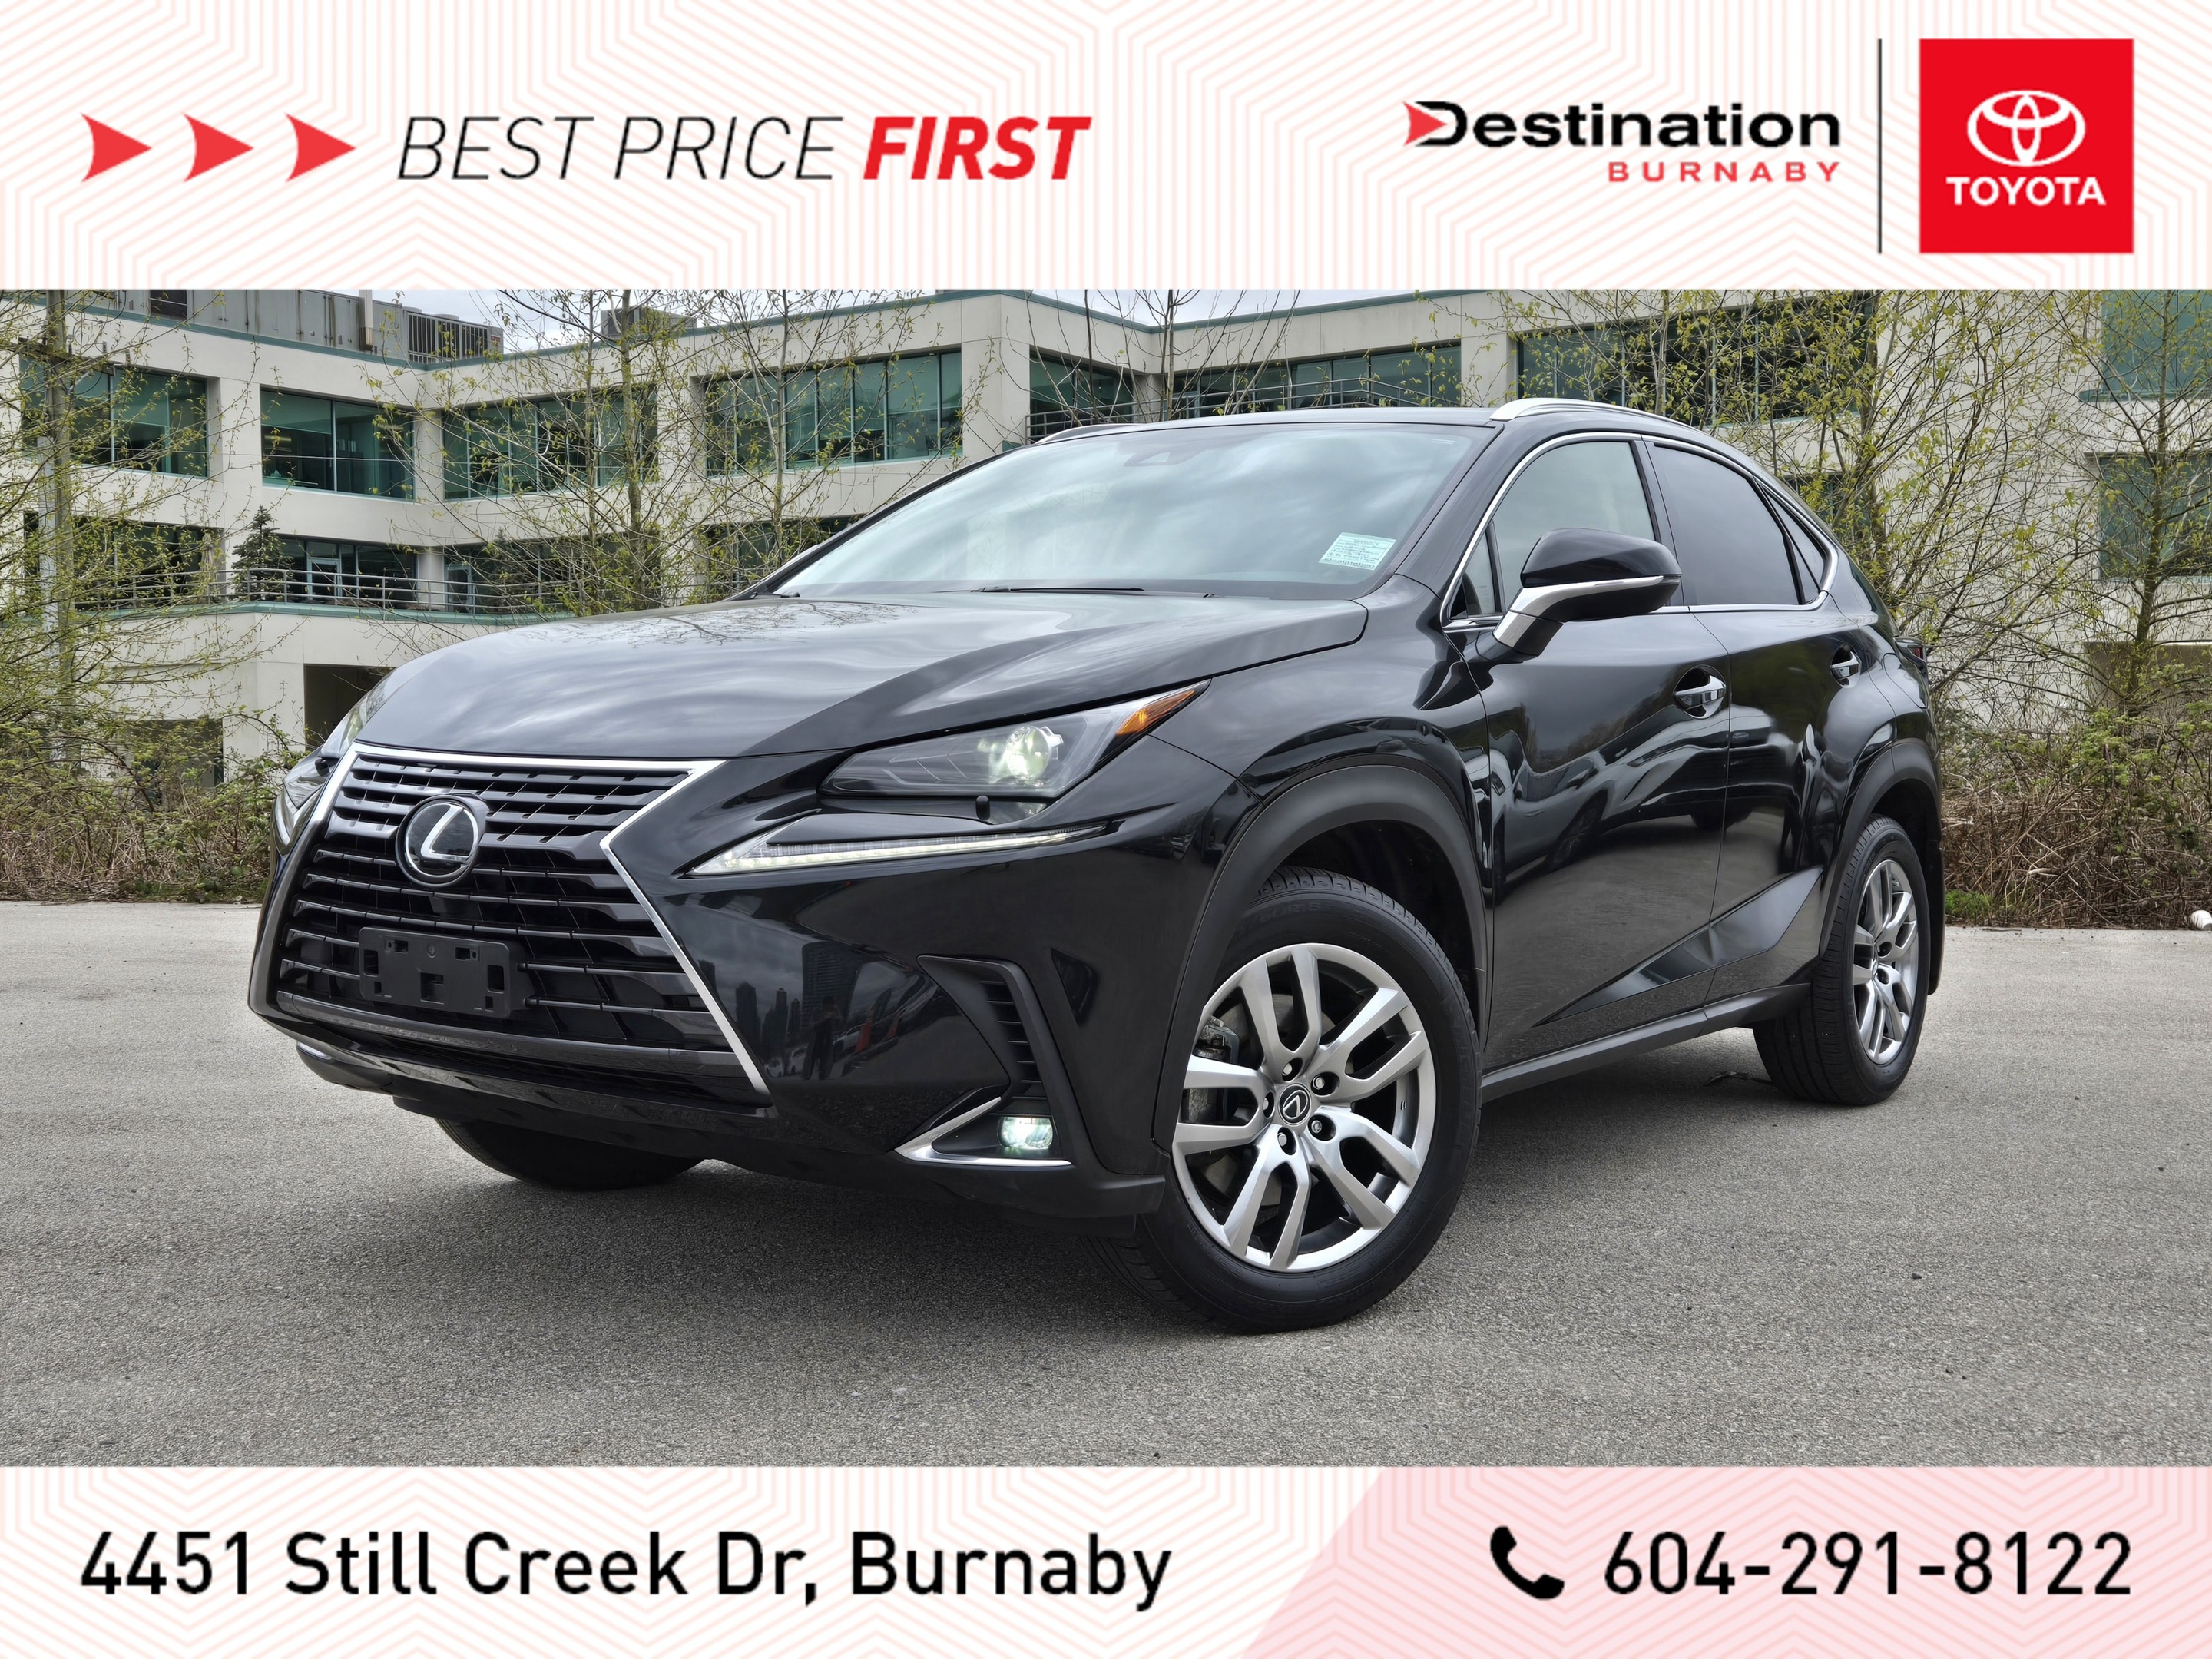 2021 Lexus NX 300 Premium AWD - Local, One Owner, Loaded!